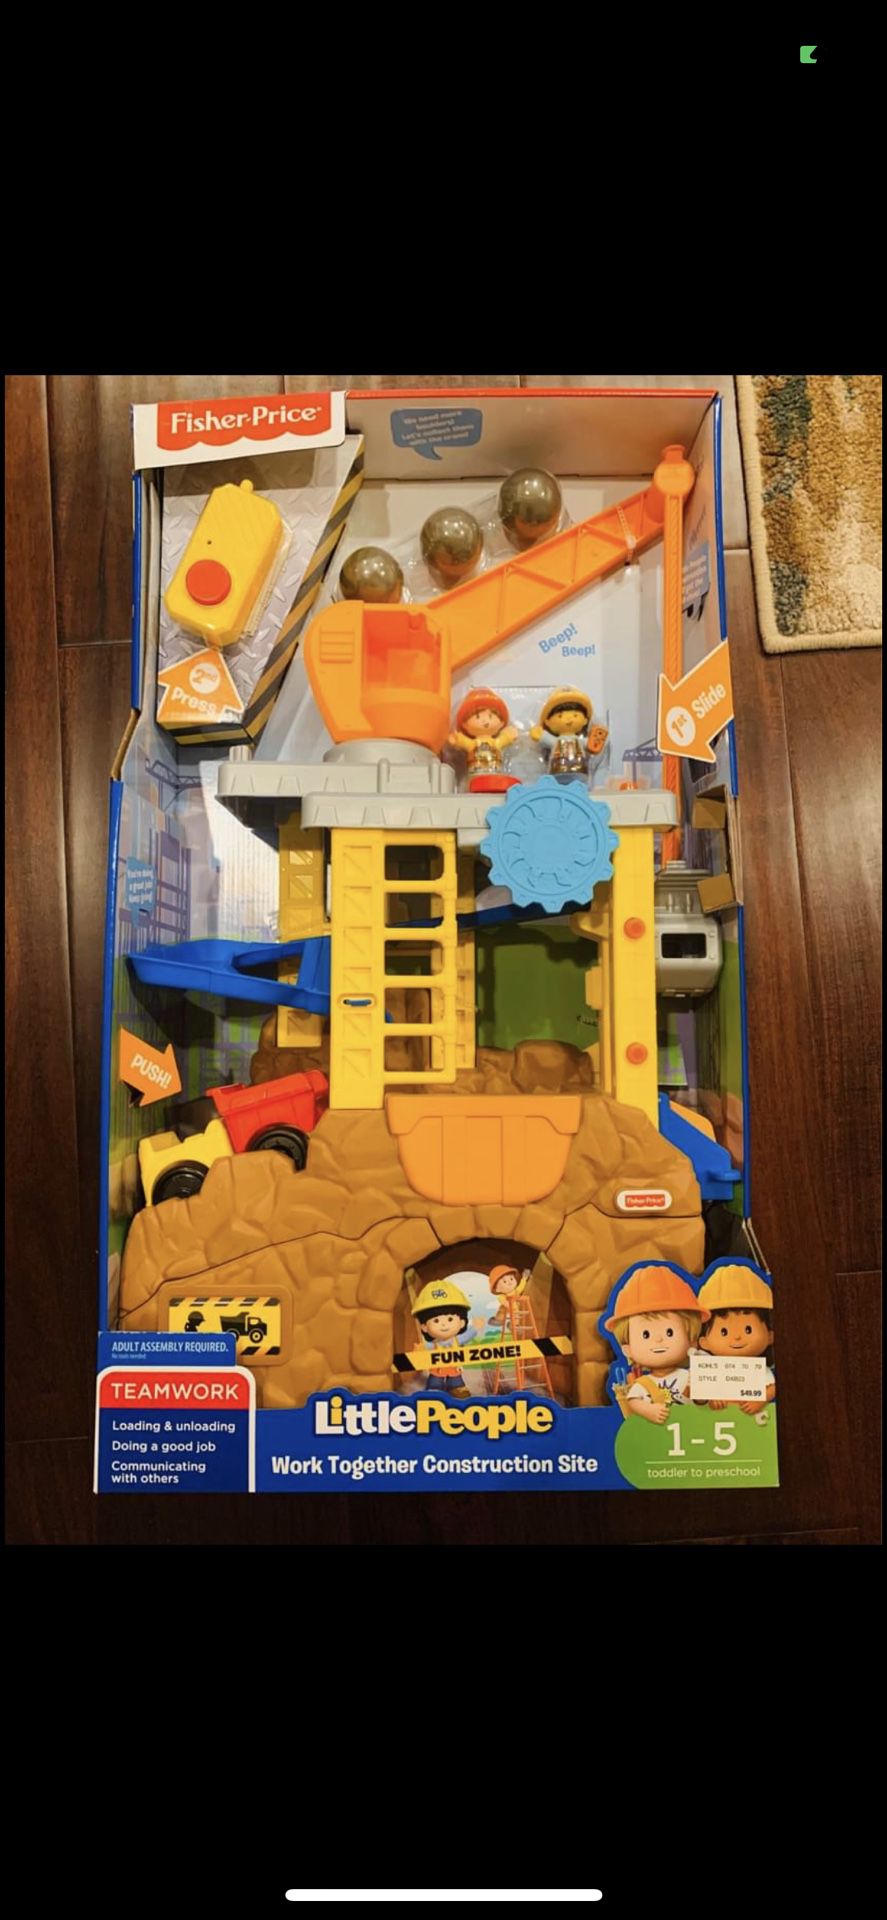 Toys: New in Box Huge Fisher-Price Little People Construction Site. Hours of fun for kids. Birthday Christmas Gift